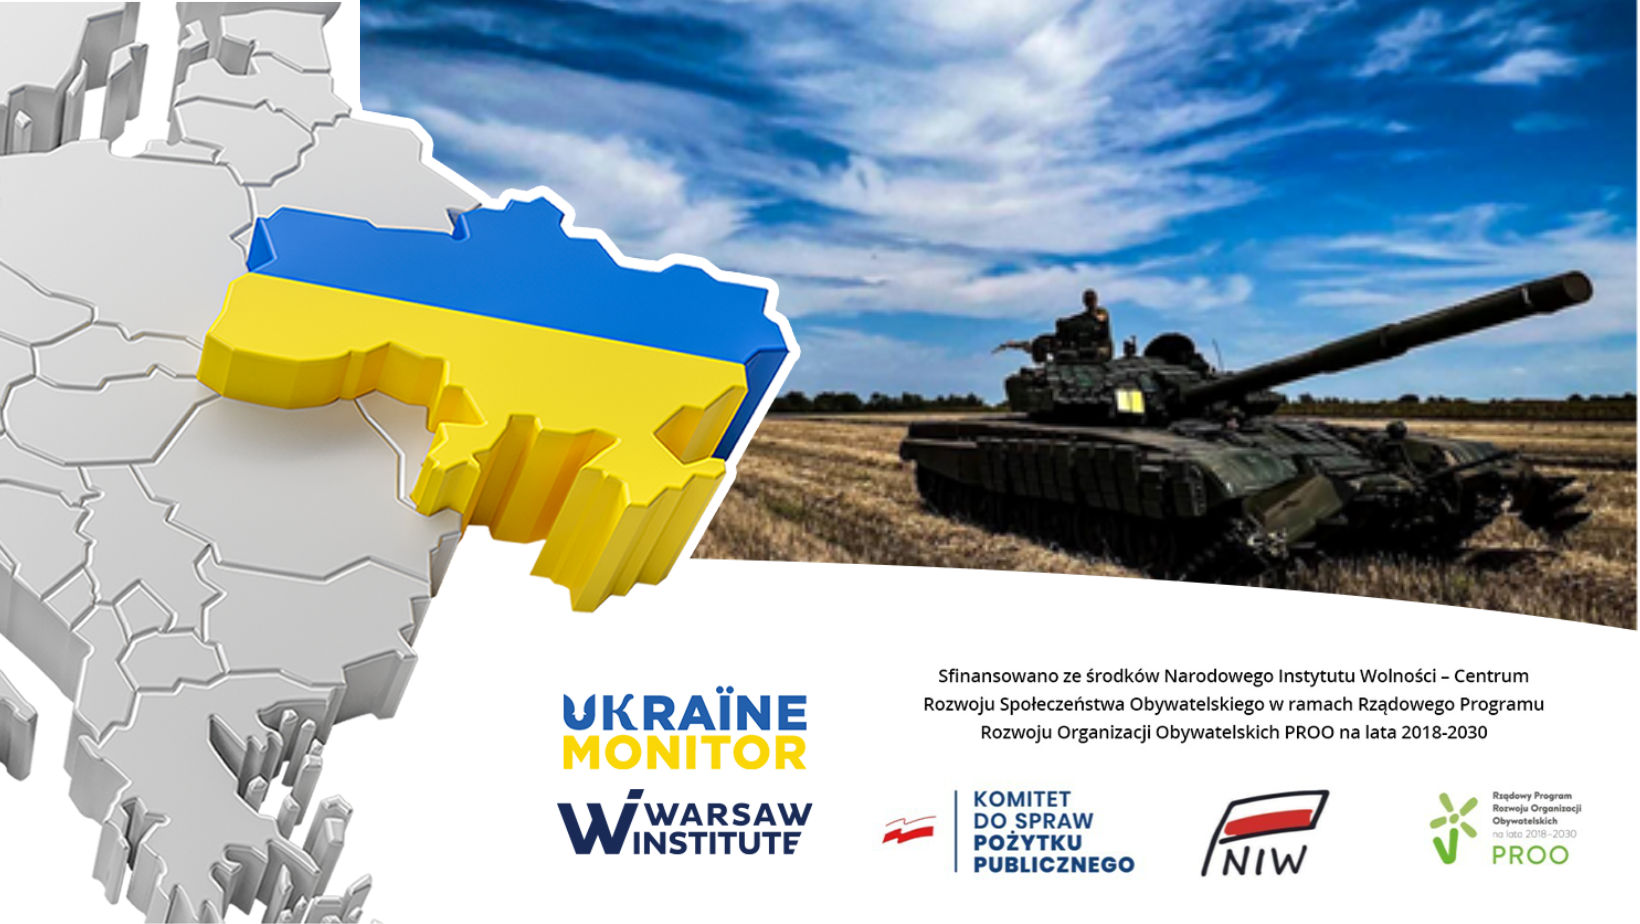 Ukraine Takes Strategic Initiative On Two Fronts